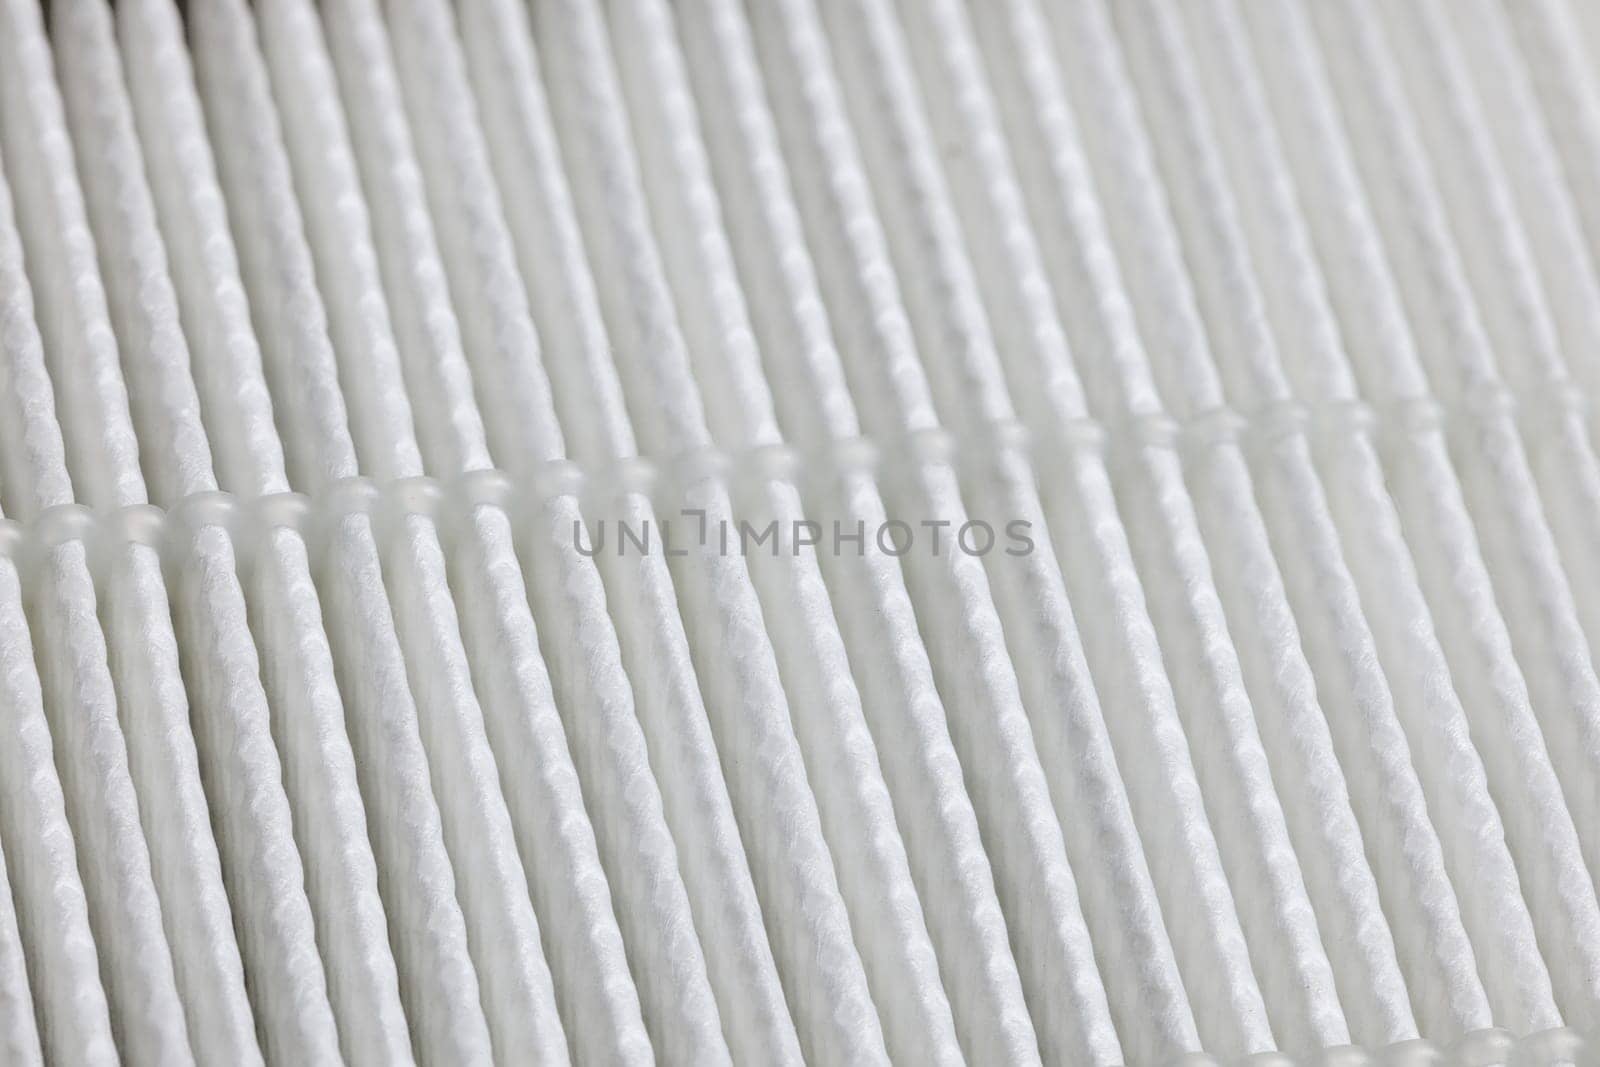 closeup full-frame view of white linear HEPA - high effective particle air - filter